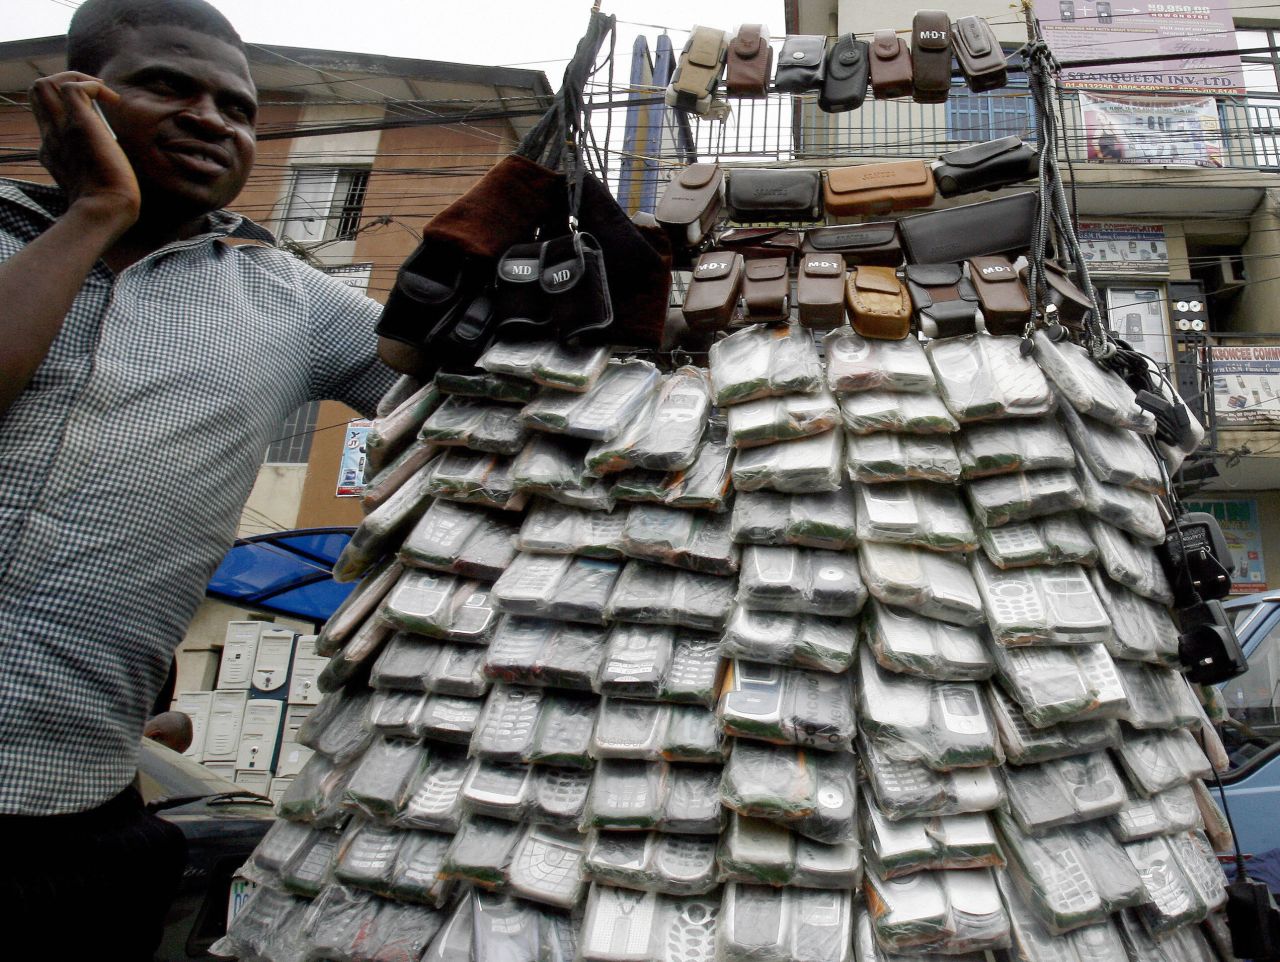 A vendor of mobile phones in Lagos, Nigeria, in April 2007. The cost of cell phones have dropped in the past decade, which saw mobile subscriptions grow to 4 billion in the developing world.